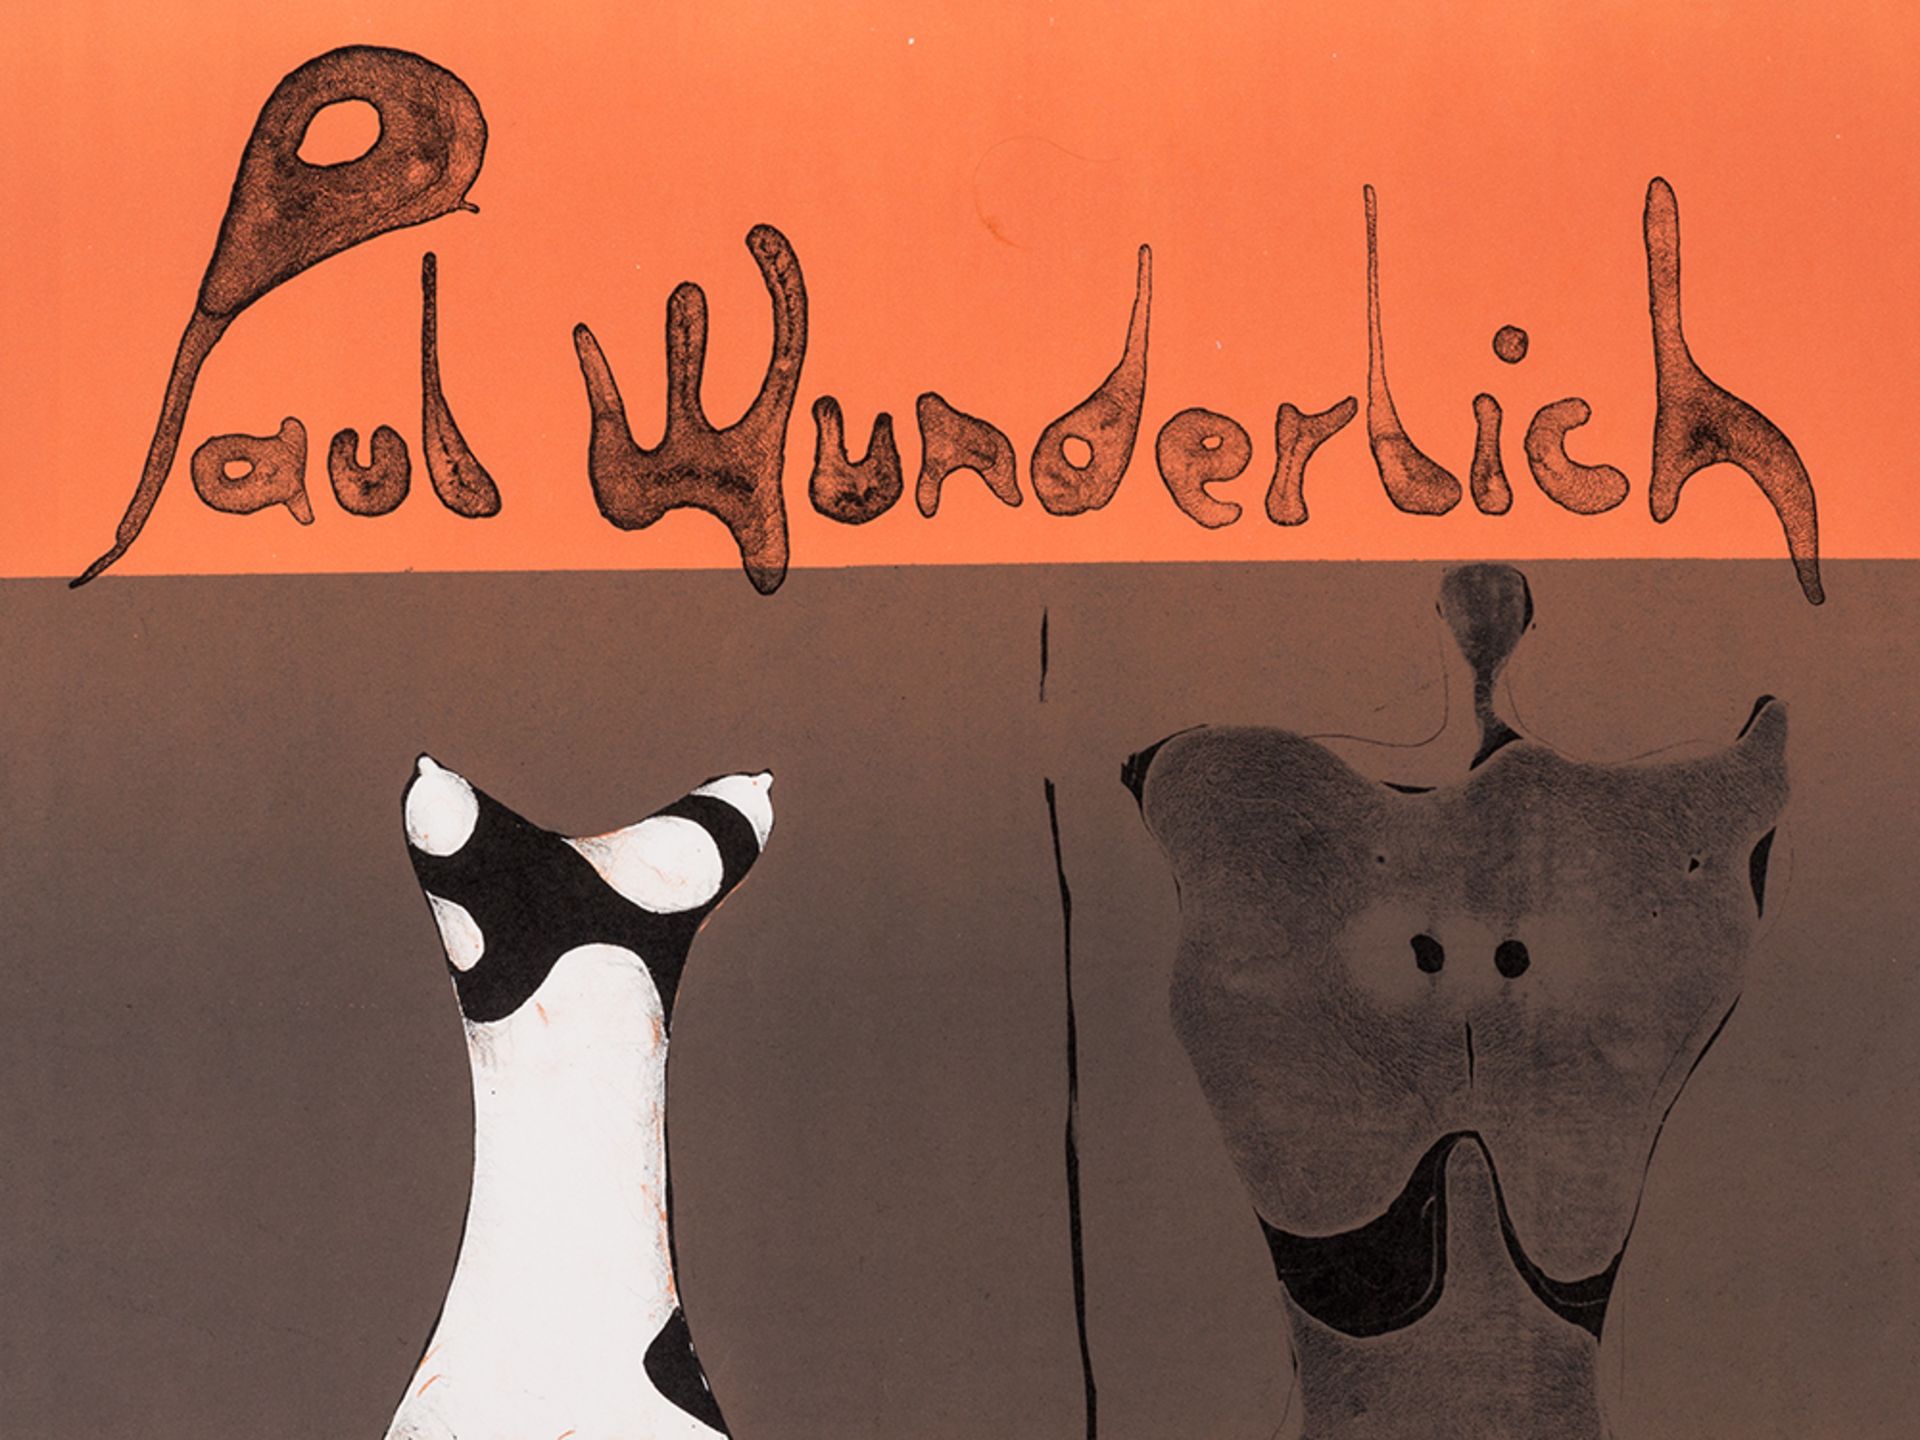 Paul Wunderlich, Poster Brusberg, Lithograph, 1965 - Image 7 of 14